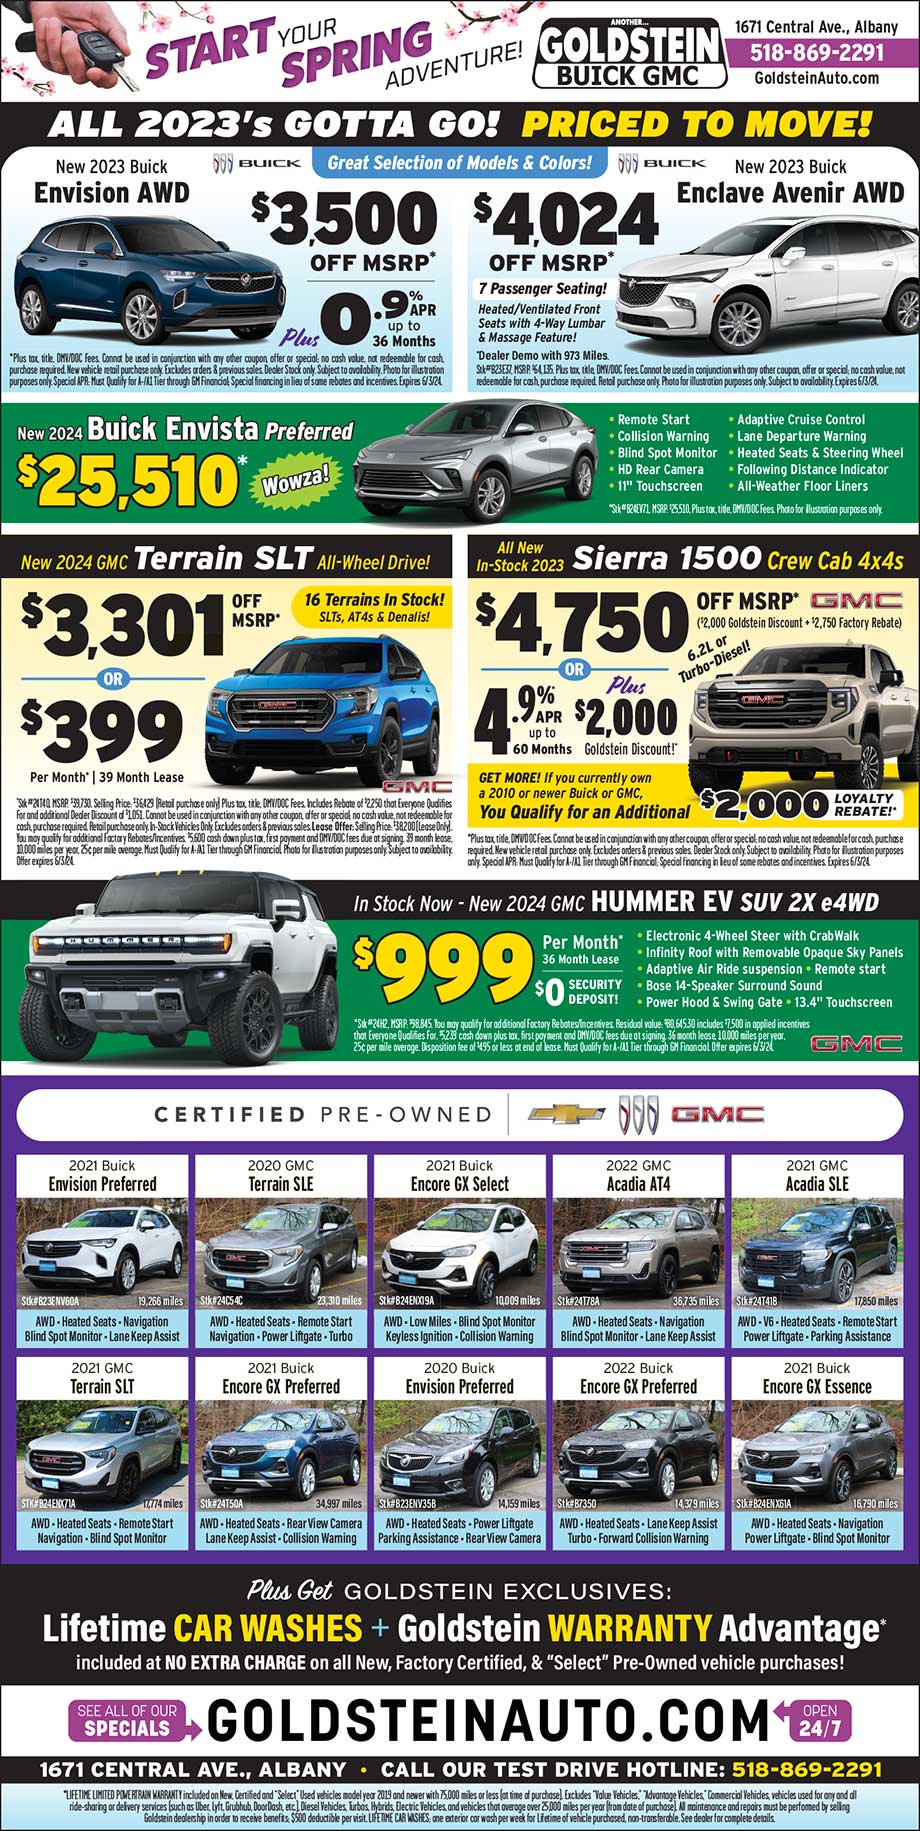 Goldstein Buick GMC of Albany, NY Newspaper Specials